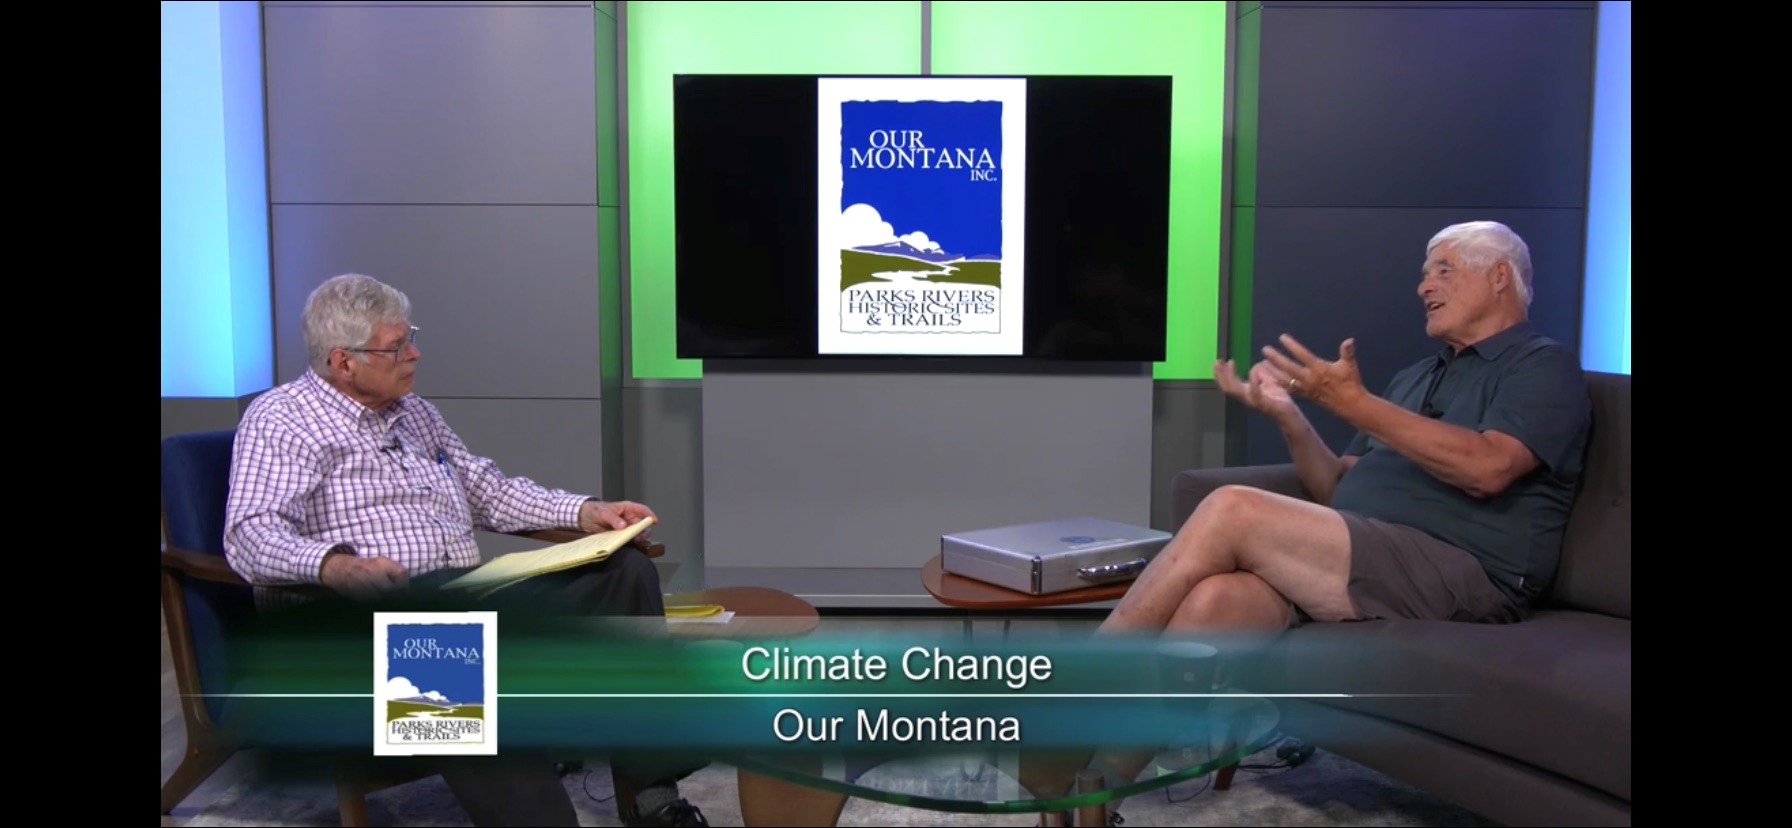 EXPLORING THE IMPACT OF CLIMATE CHANGE ON MONTANA: A CONVERSATION WITH DR. STEVEN RUNNING